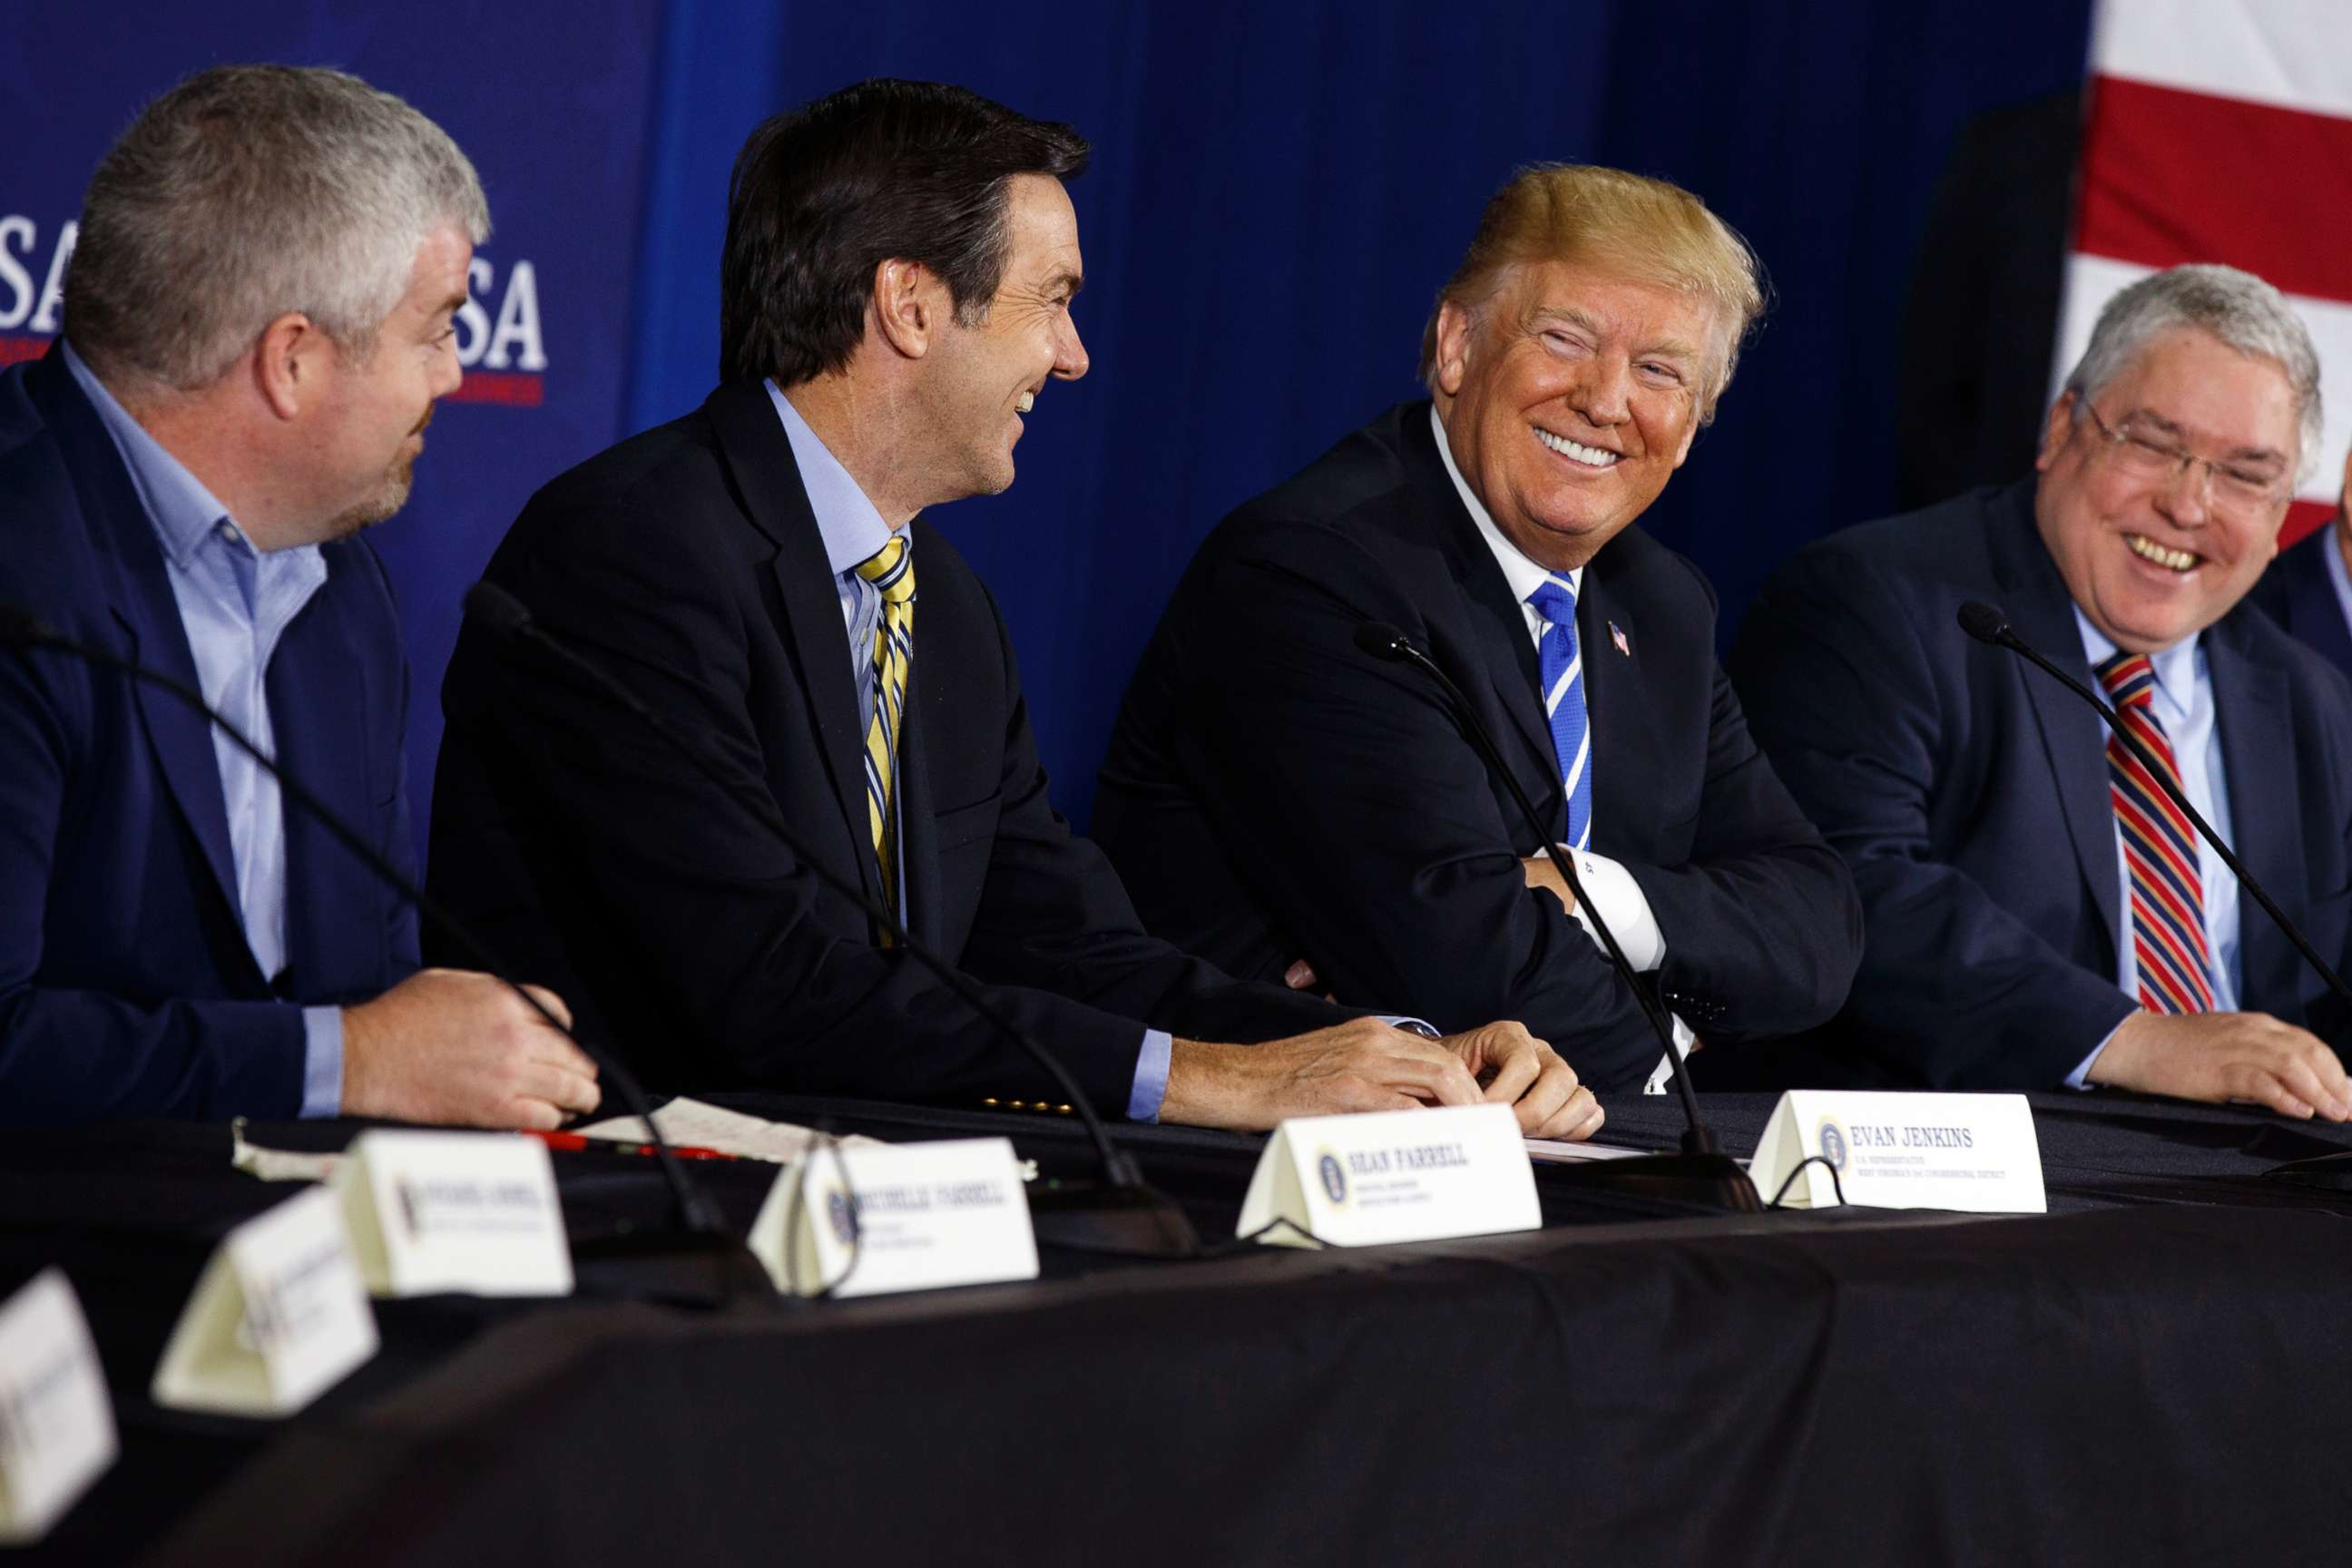 PHOTO: President Donald Trump smiles during a roundtable discussion on tax policy, April 5, 2018, in White Sulphur Springs, W.Va.